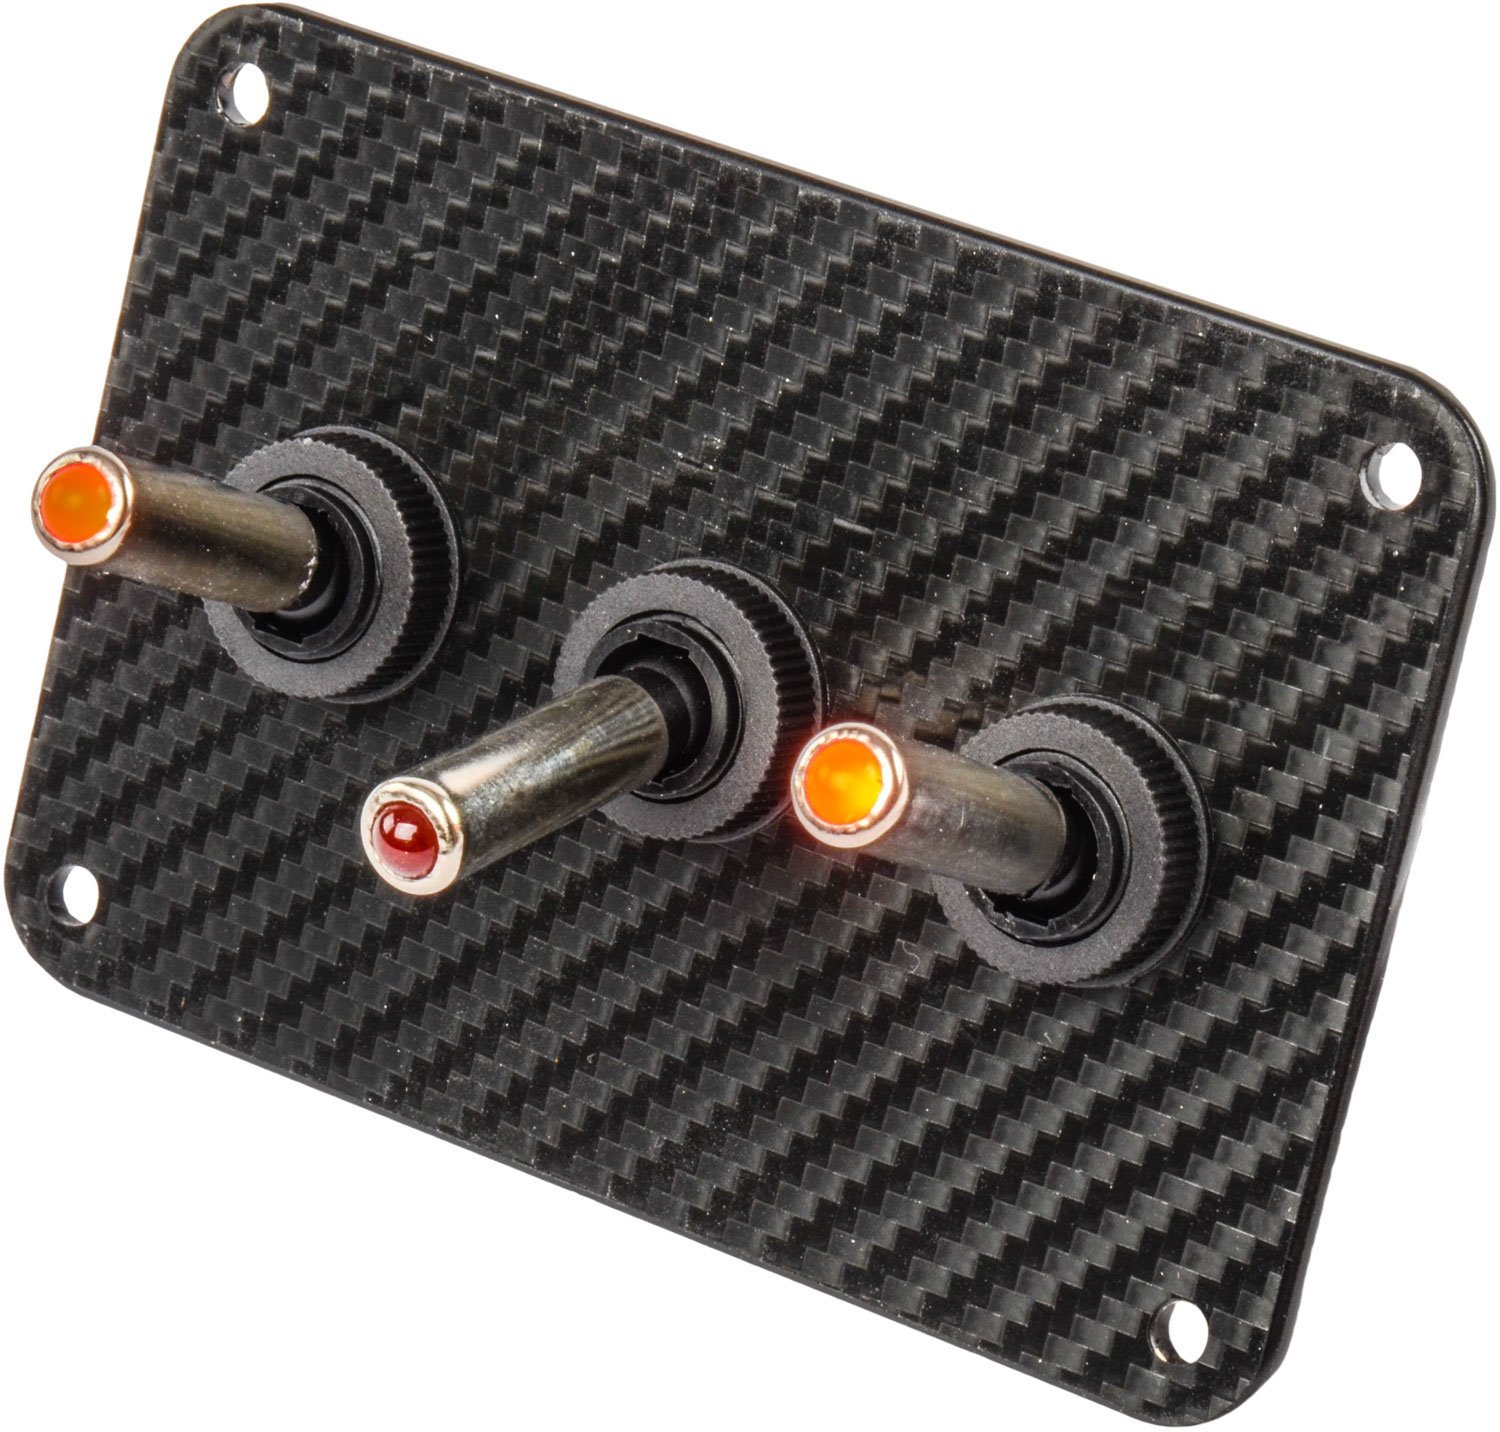 3-Toggle Panel with Red LED Switches Black Carbon Fiber Vinyl Finish